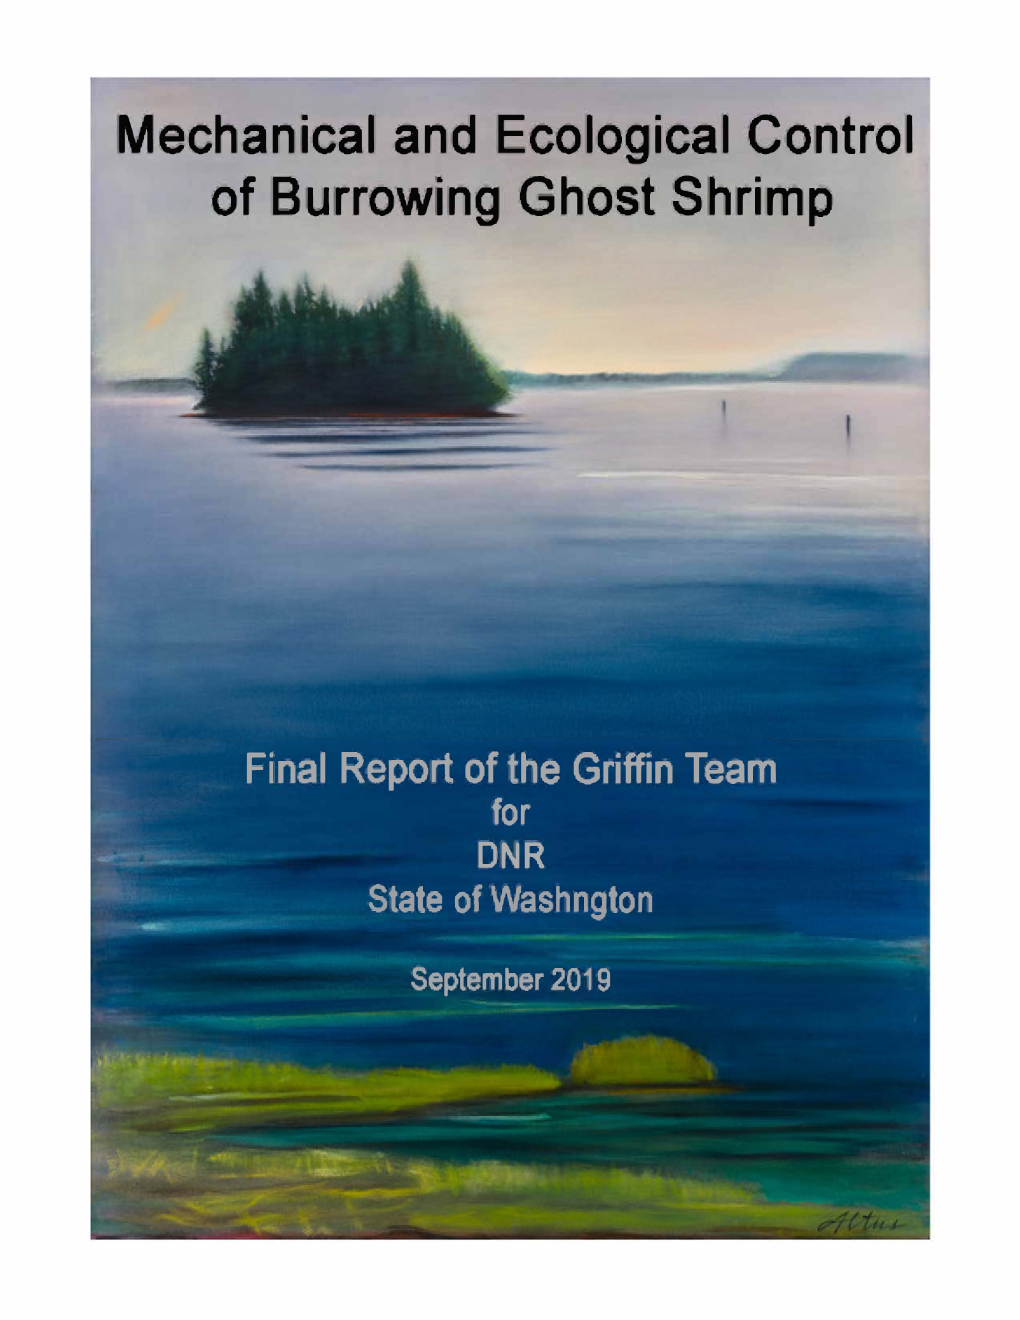 Mechanical and Ecological Control of Burrowing Ghost Shrimp